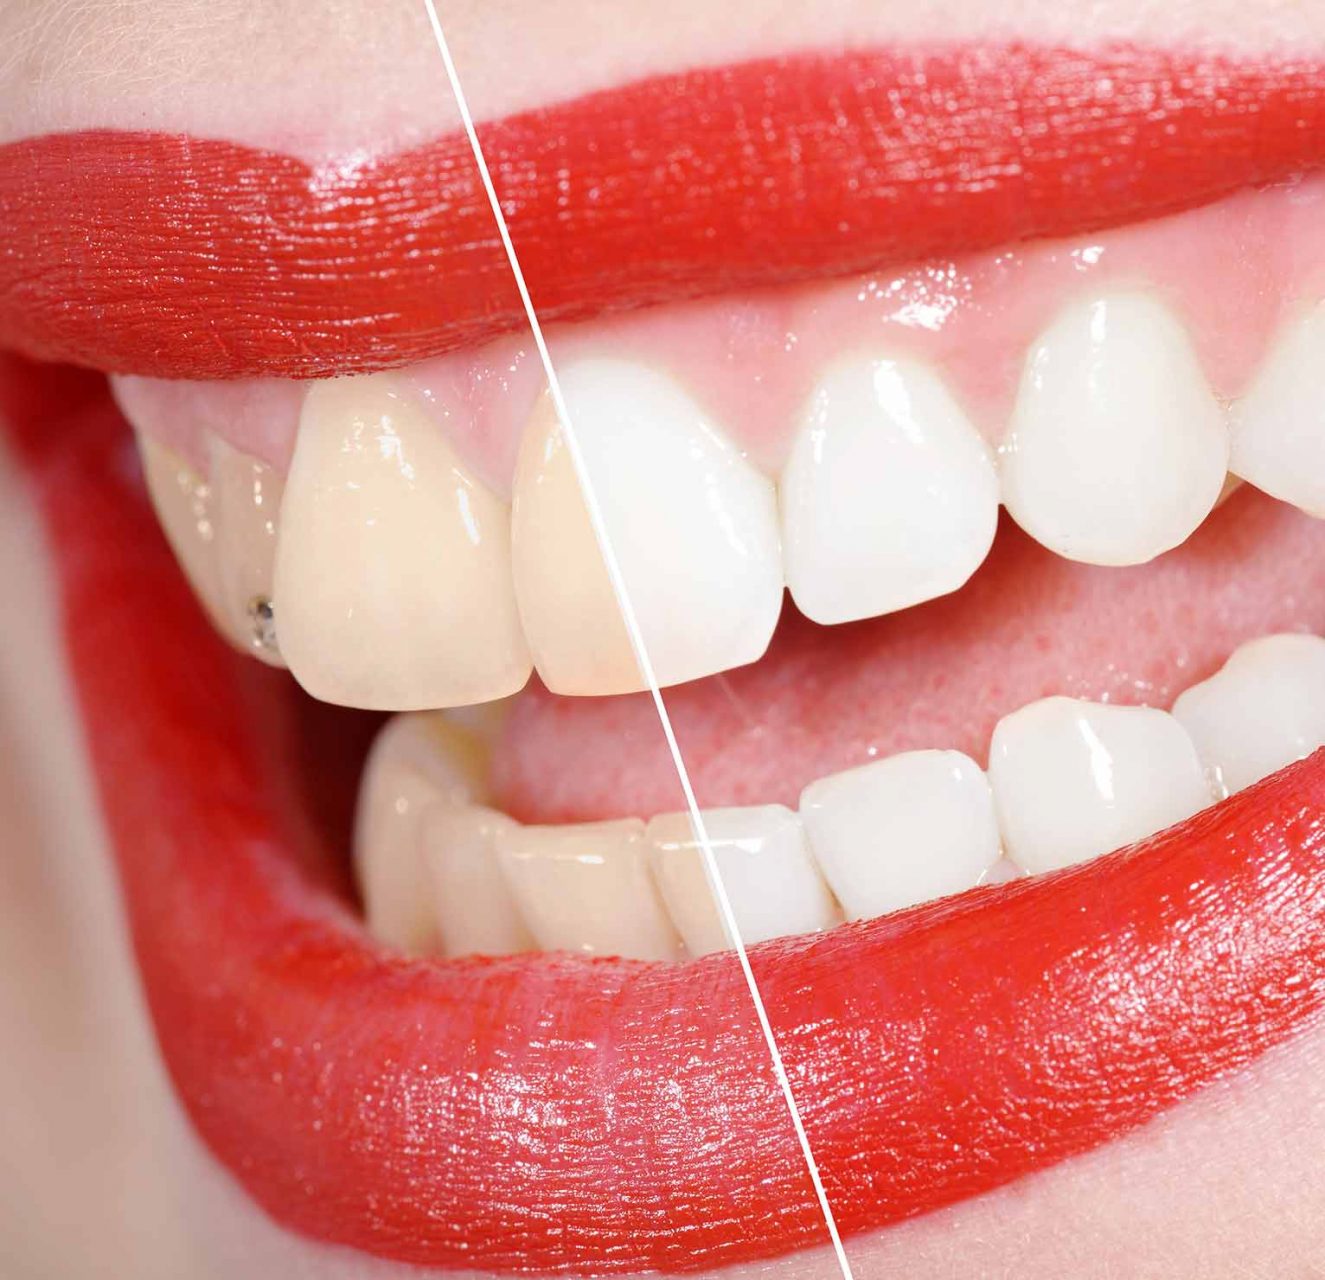 Comparison before and after tooth whitening